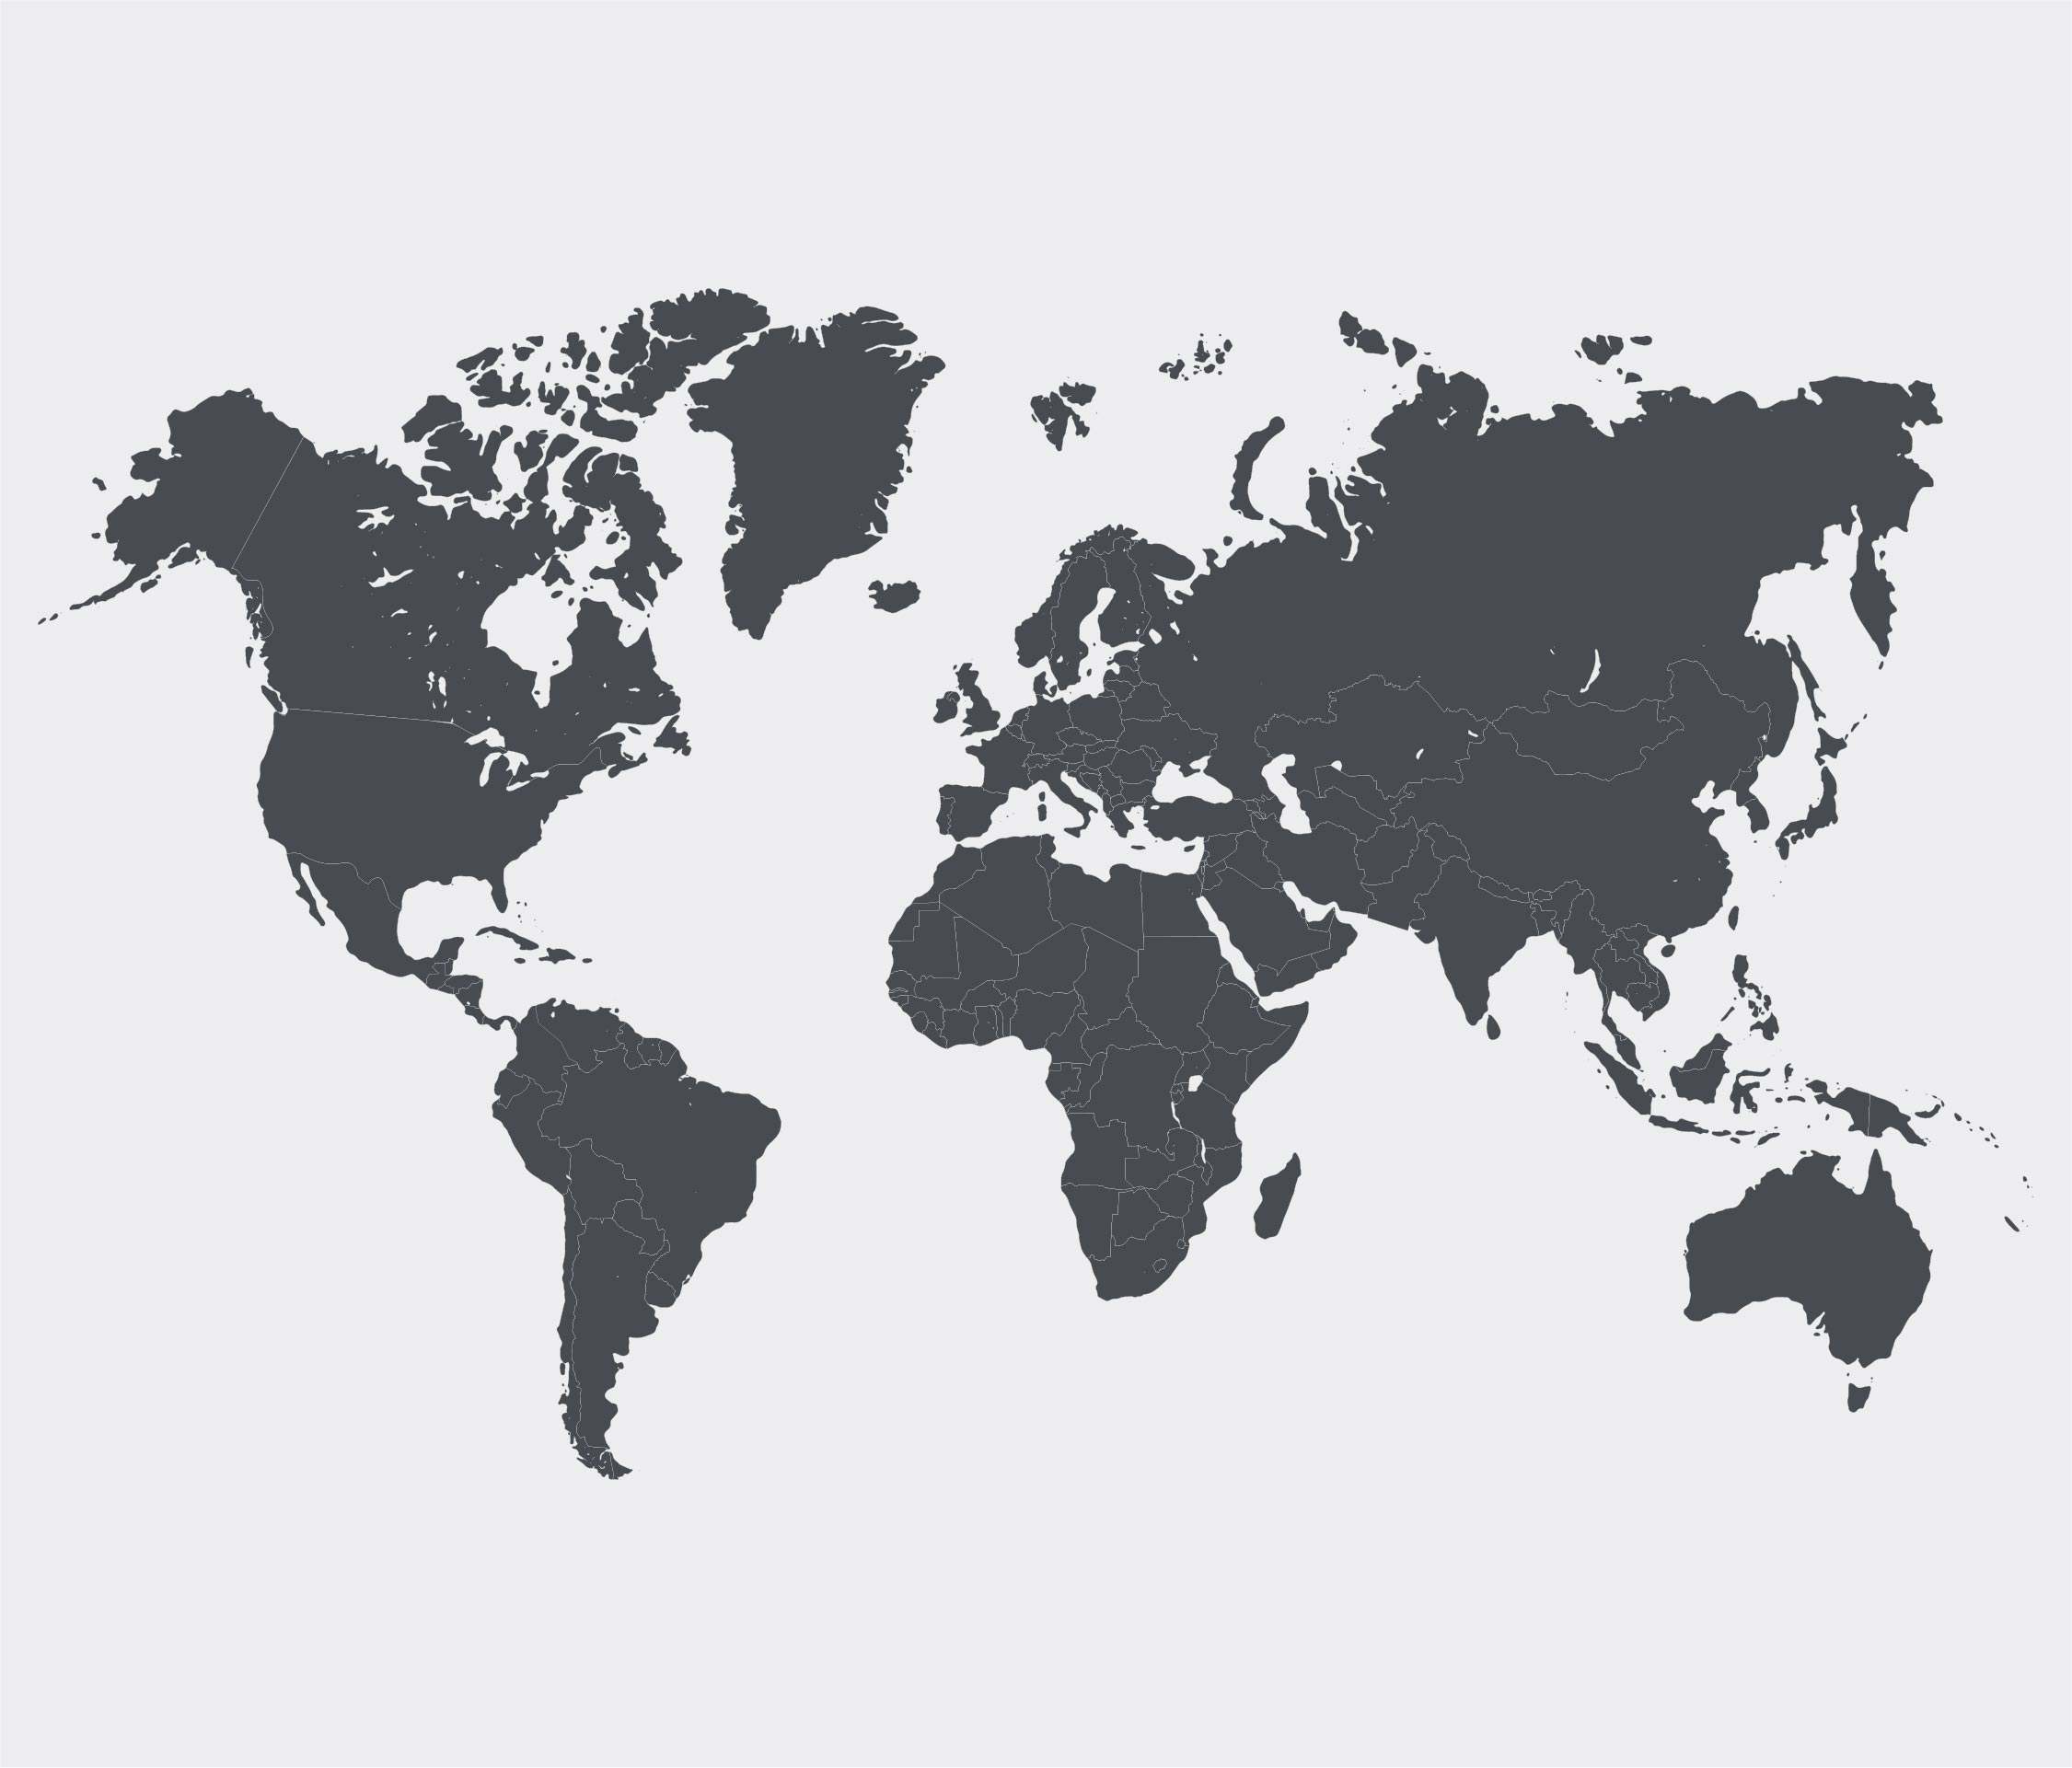 Printable World Map Continents Not Labeled